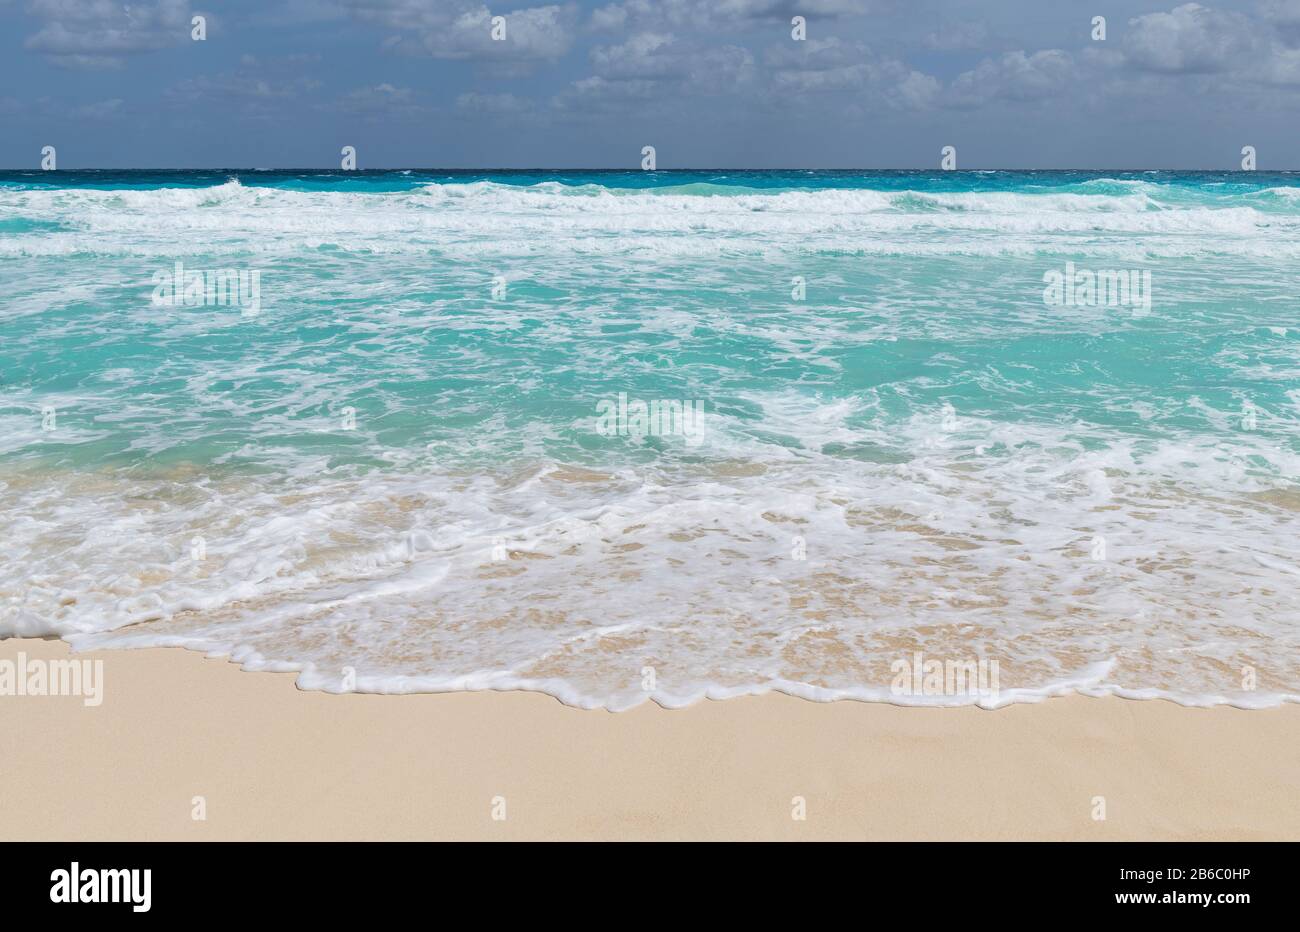 The transparent turquoise waters of Dolphin beach or Playa Delfin by the Caribbean Sea in Cancun, Yucatan Peninsula, Quintana Roo state, Mexico. Stock Photo